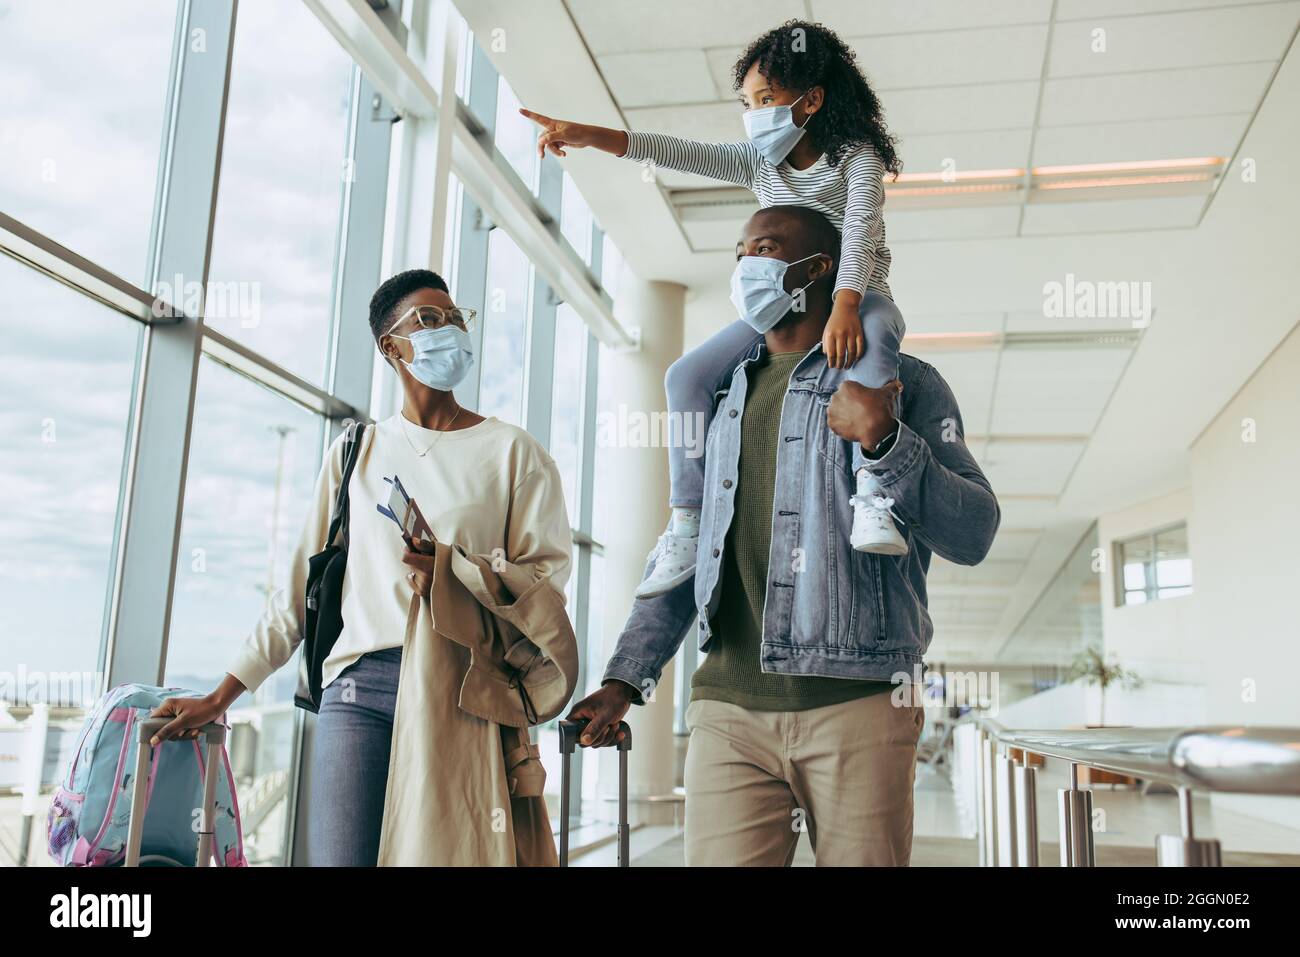 Young girl pointing away while on shoulder of her father and woman at airport. African family traveling during pandemic. Stock Photo